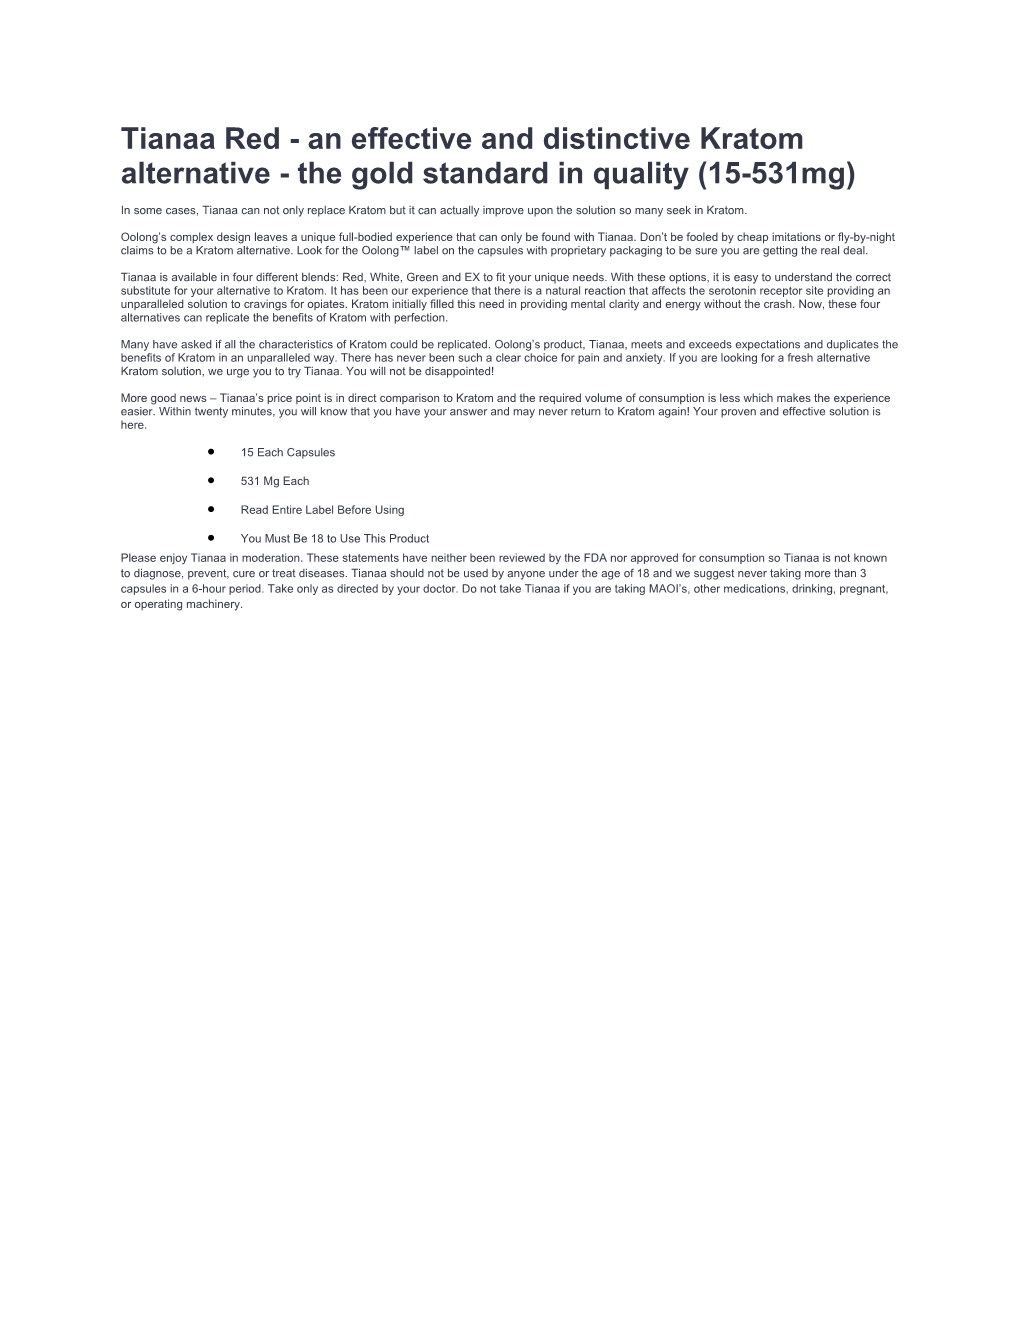 Tianaa Red - an Effective and Distinctive Kratom Alternative - the Gold Standard in Quality